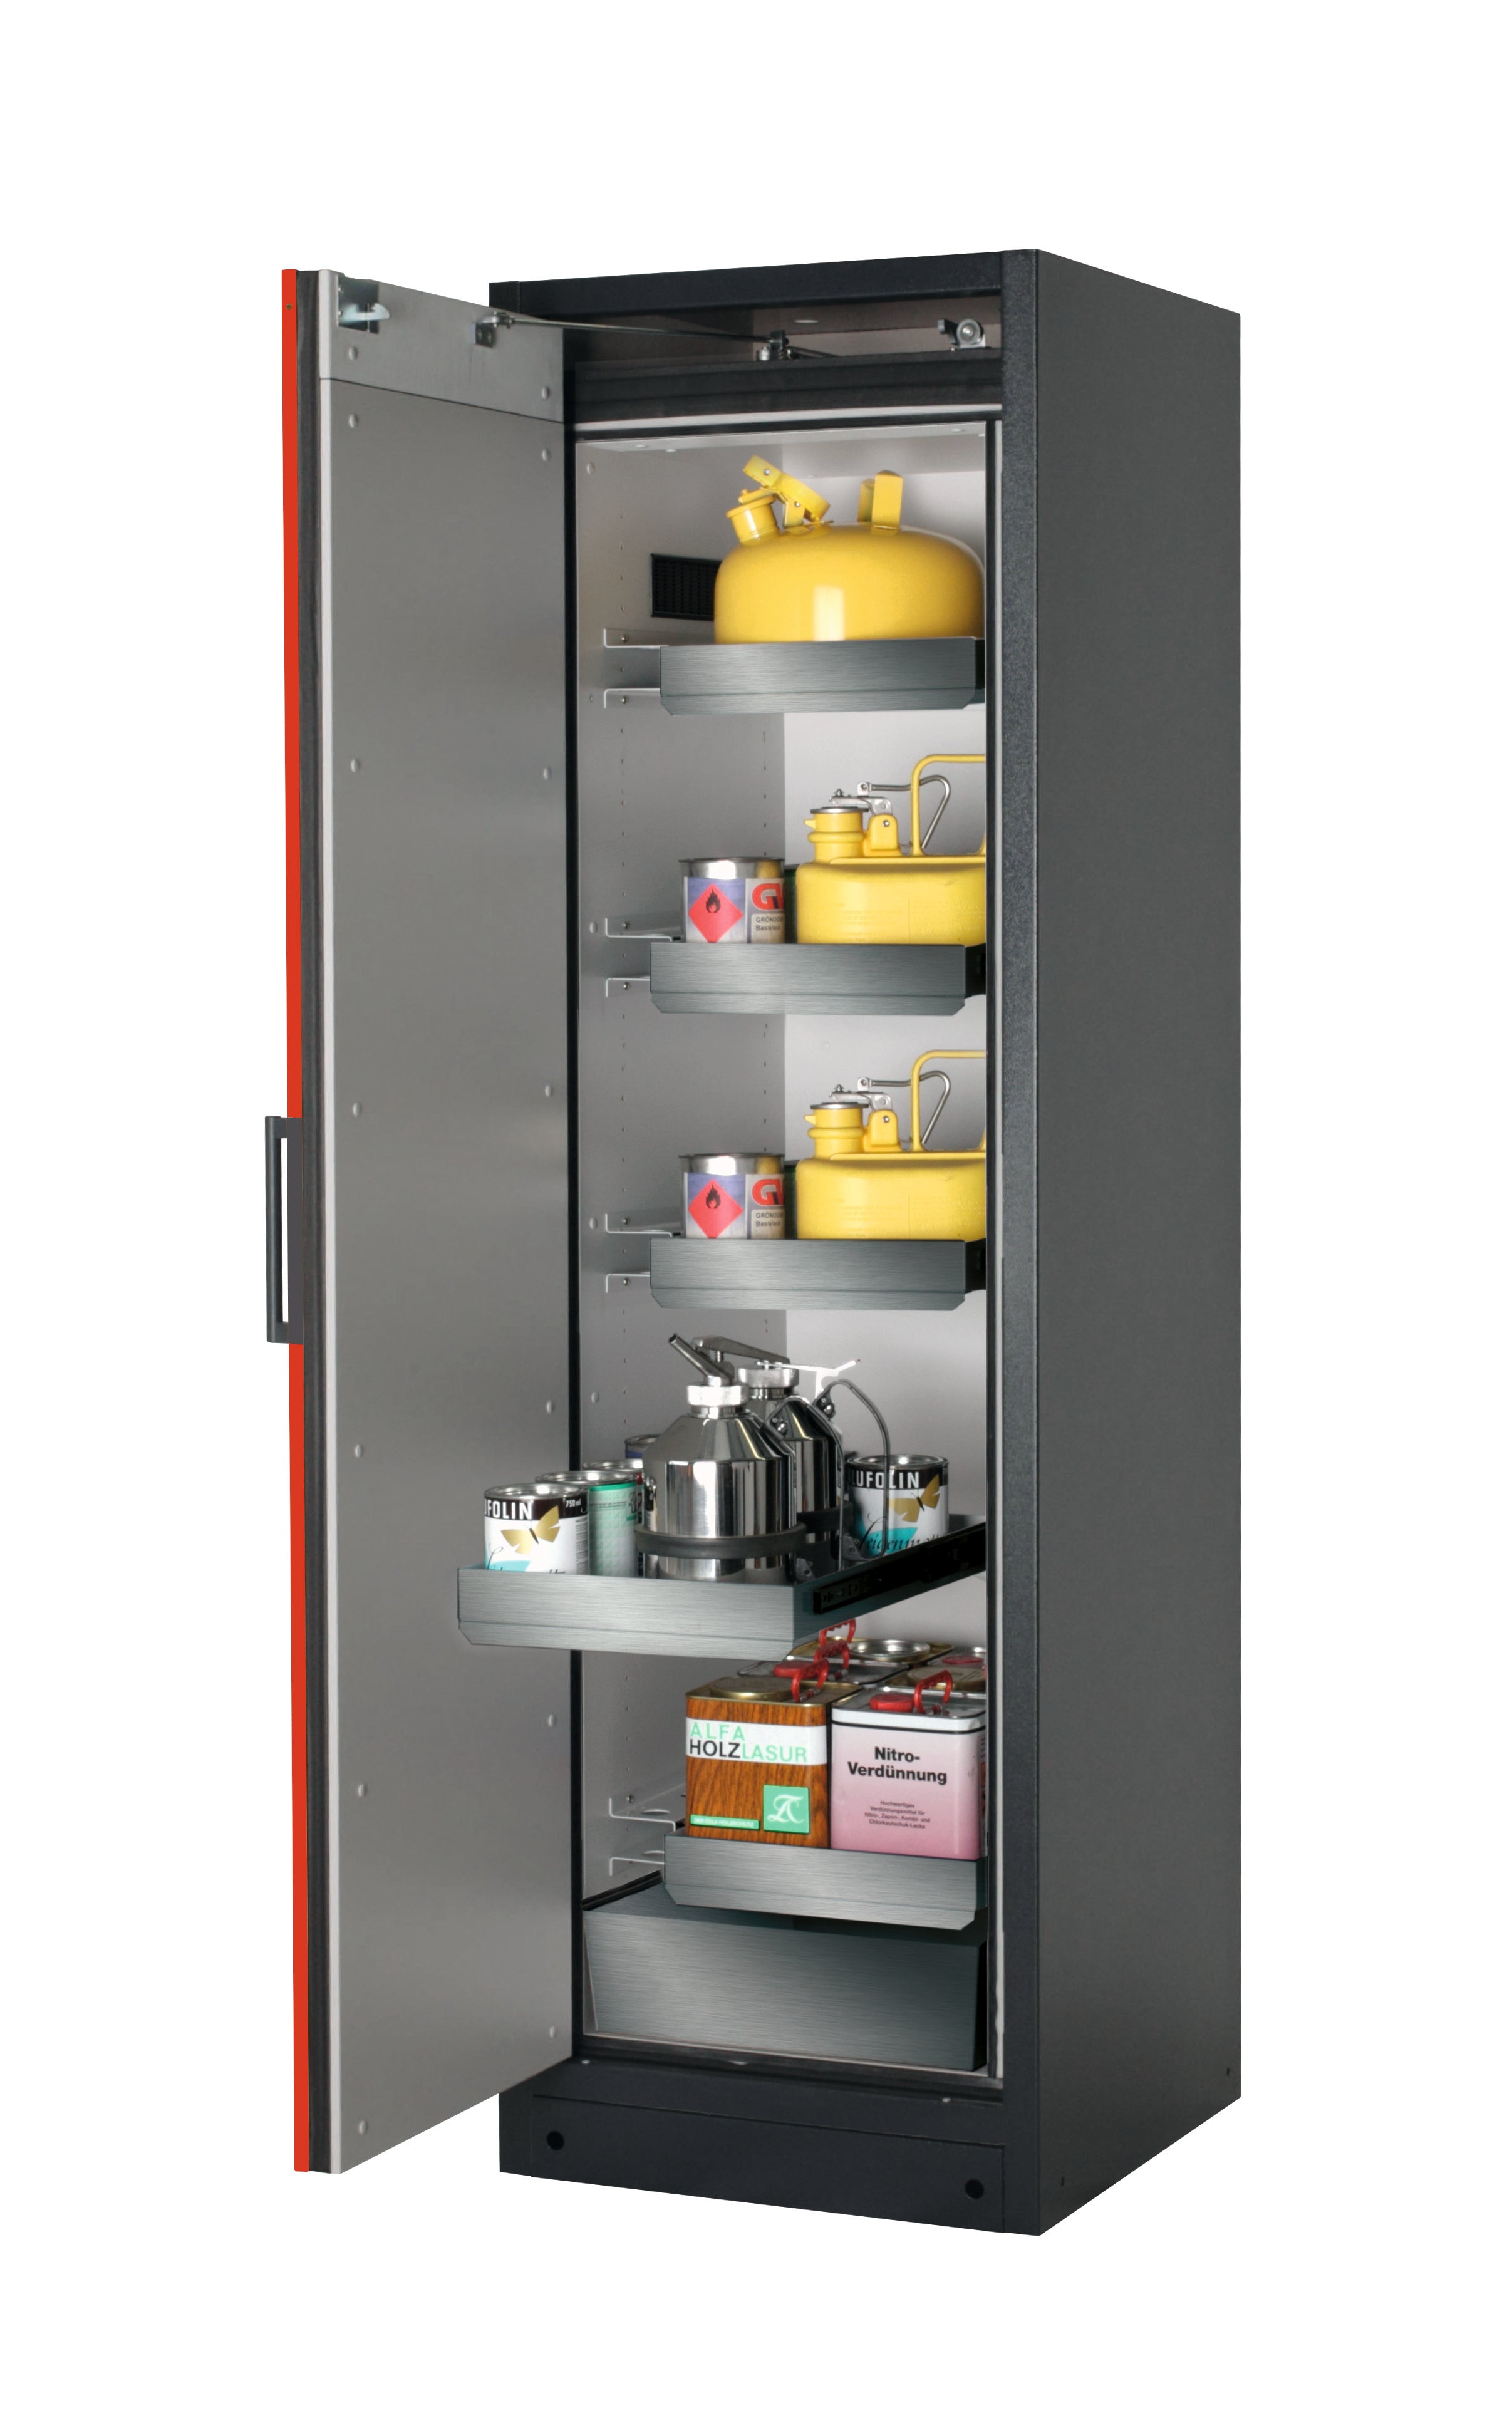 Type 90 safety storage cabinet Q-PEGASUS-90 model Q90.195.060.WDAC in traffic red RAL 3020 with 4x drawer (standard) (stainless steel 1.4301),